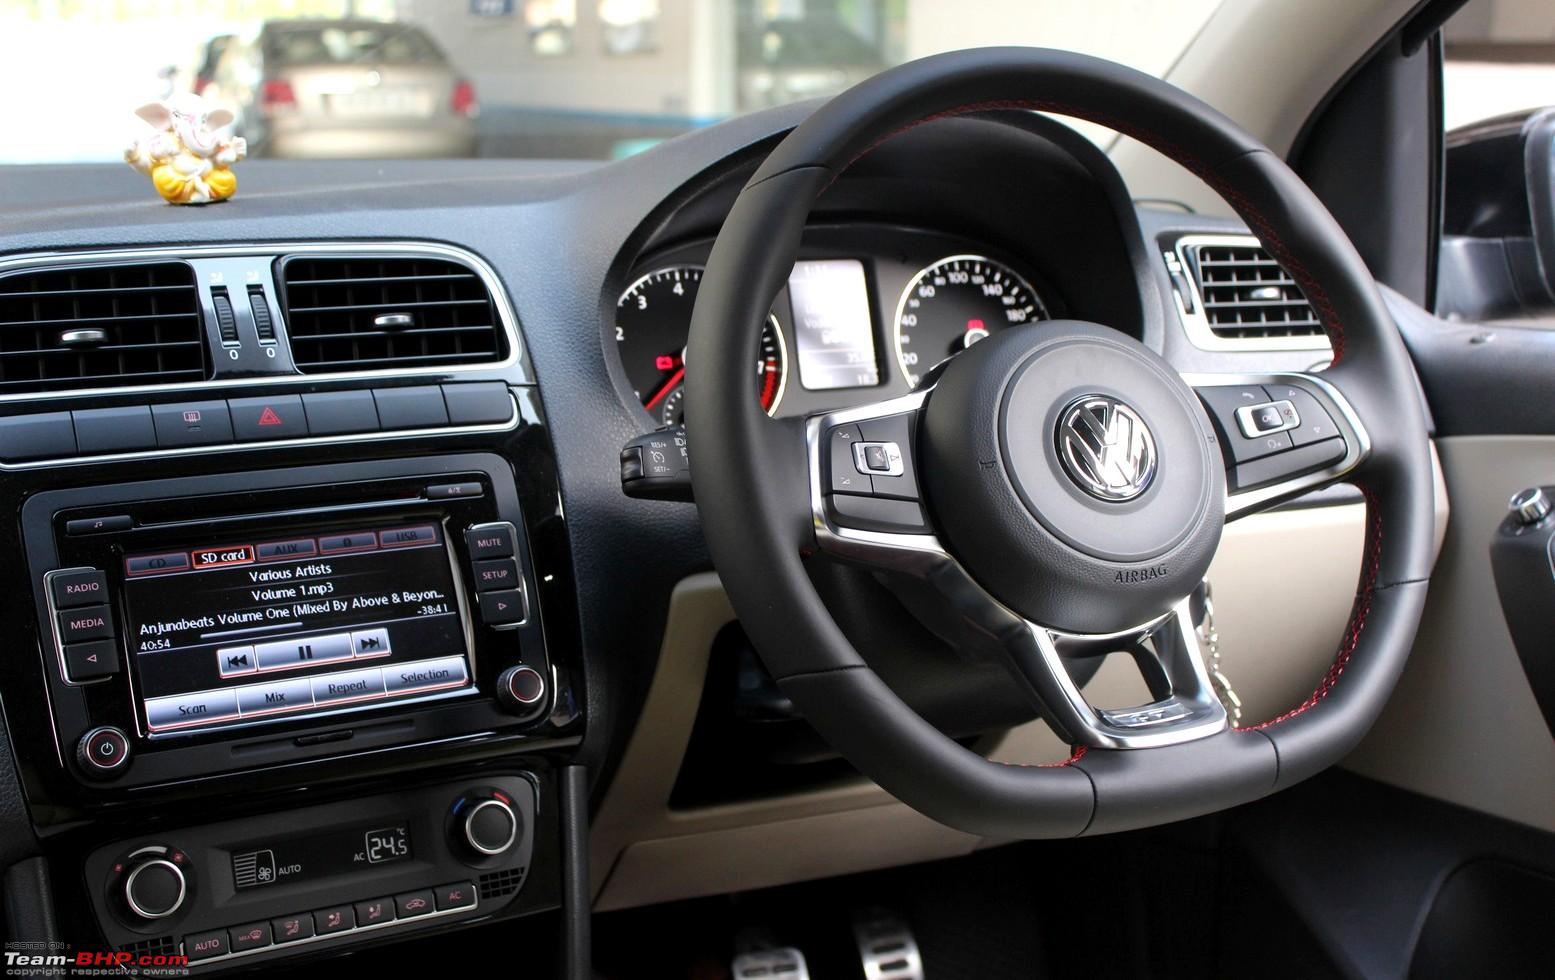 Drivers controls and steering wheel in the VW Volkswagen Polo GTI